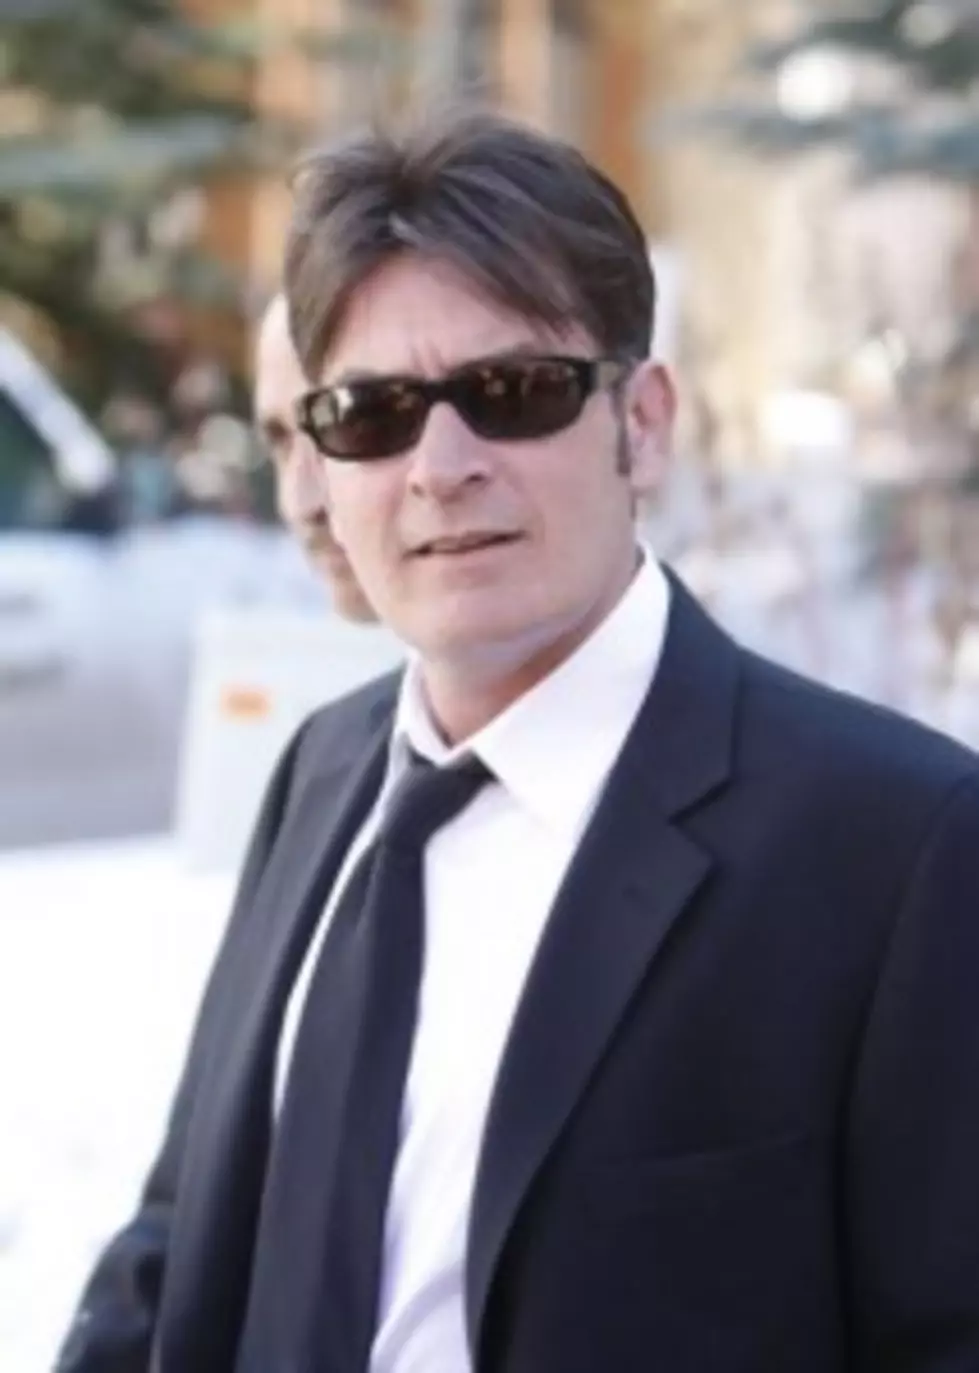 Charlie Sheen Has Been Fired From &#8220;Two And A Half Men&#8221;